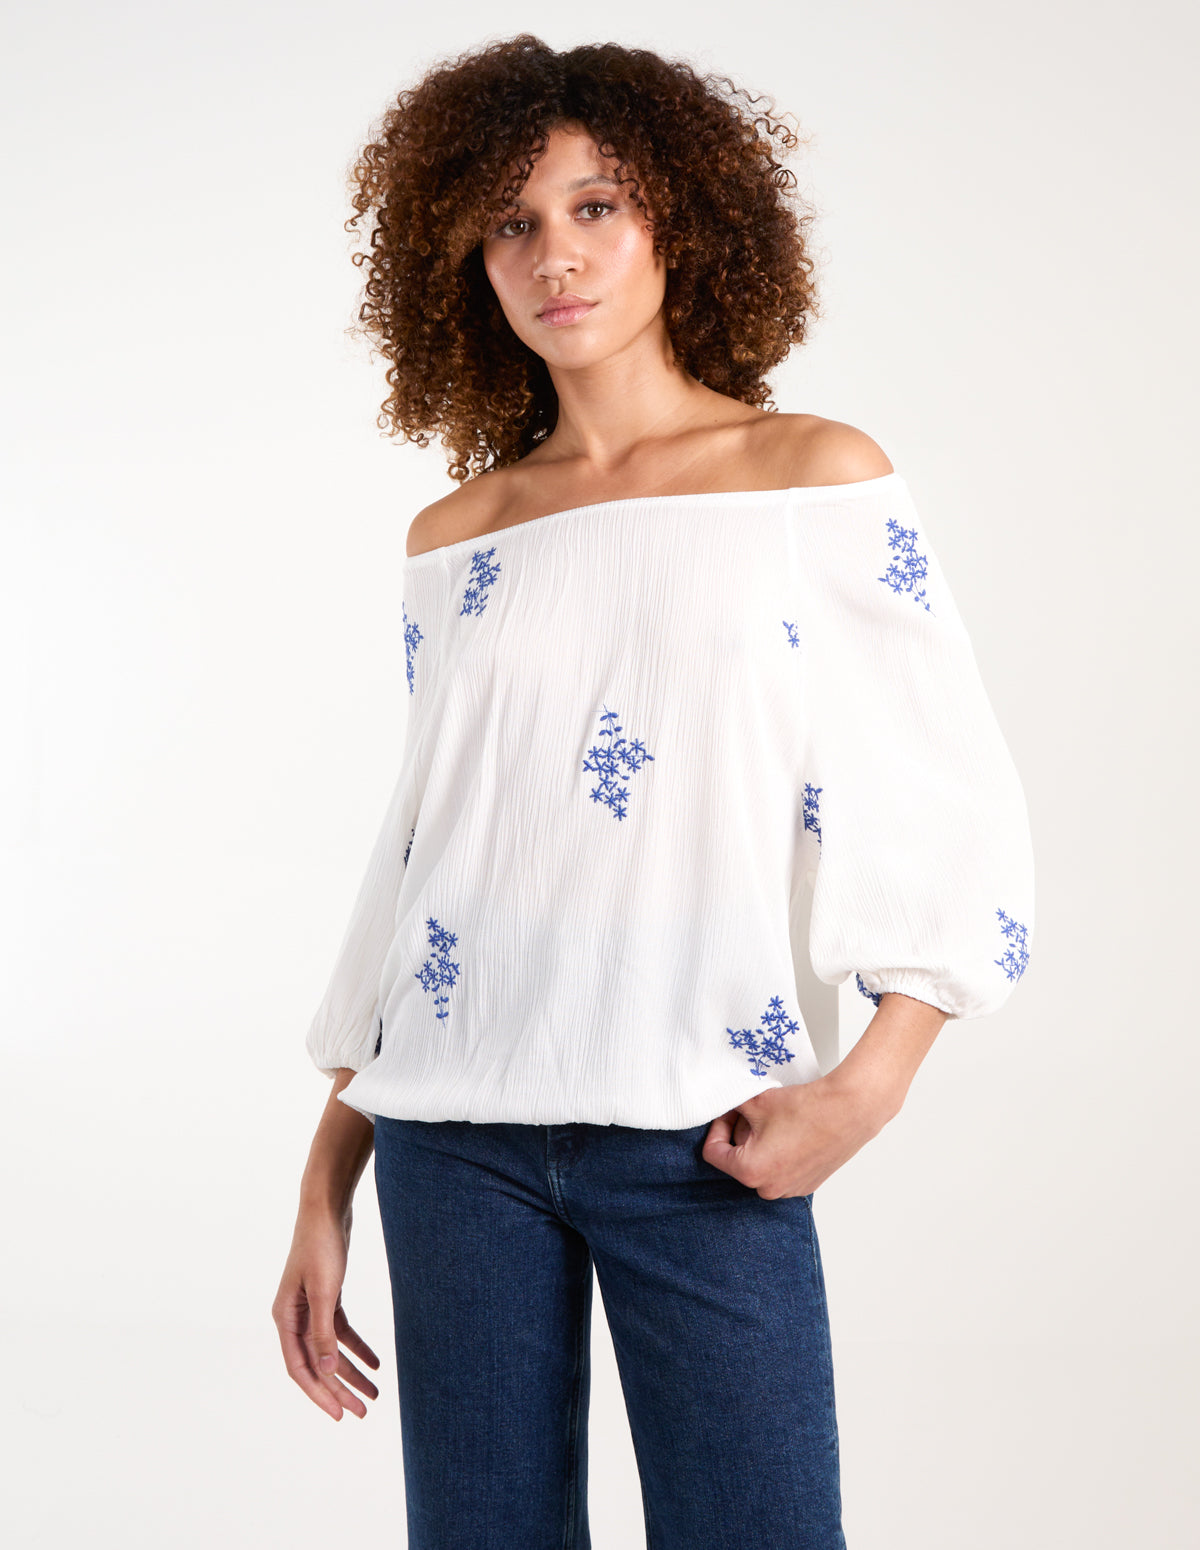 Embroidered Puffball Top 